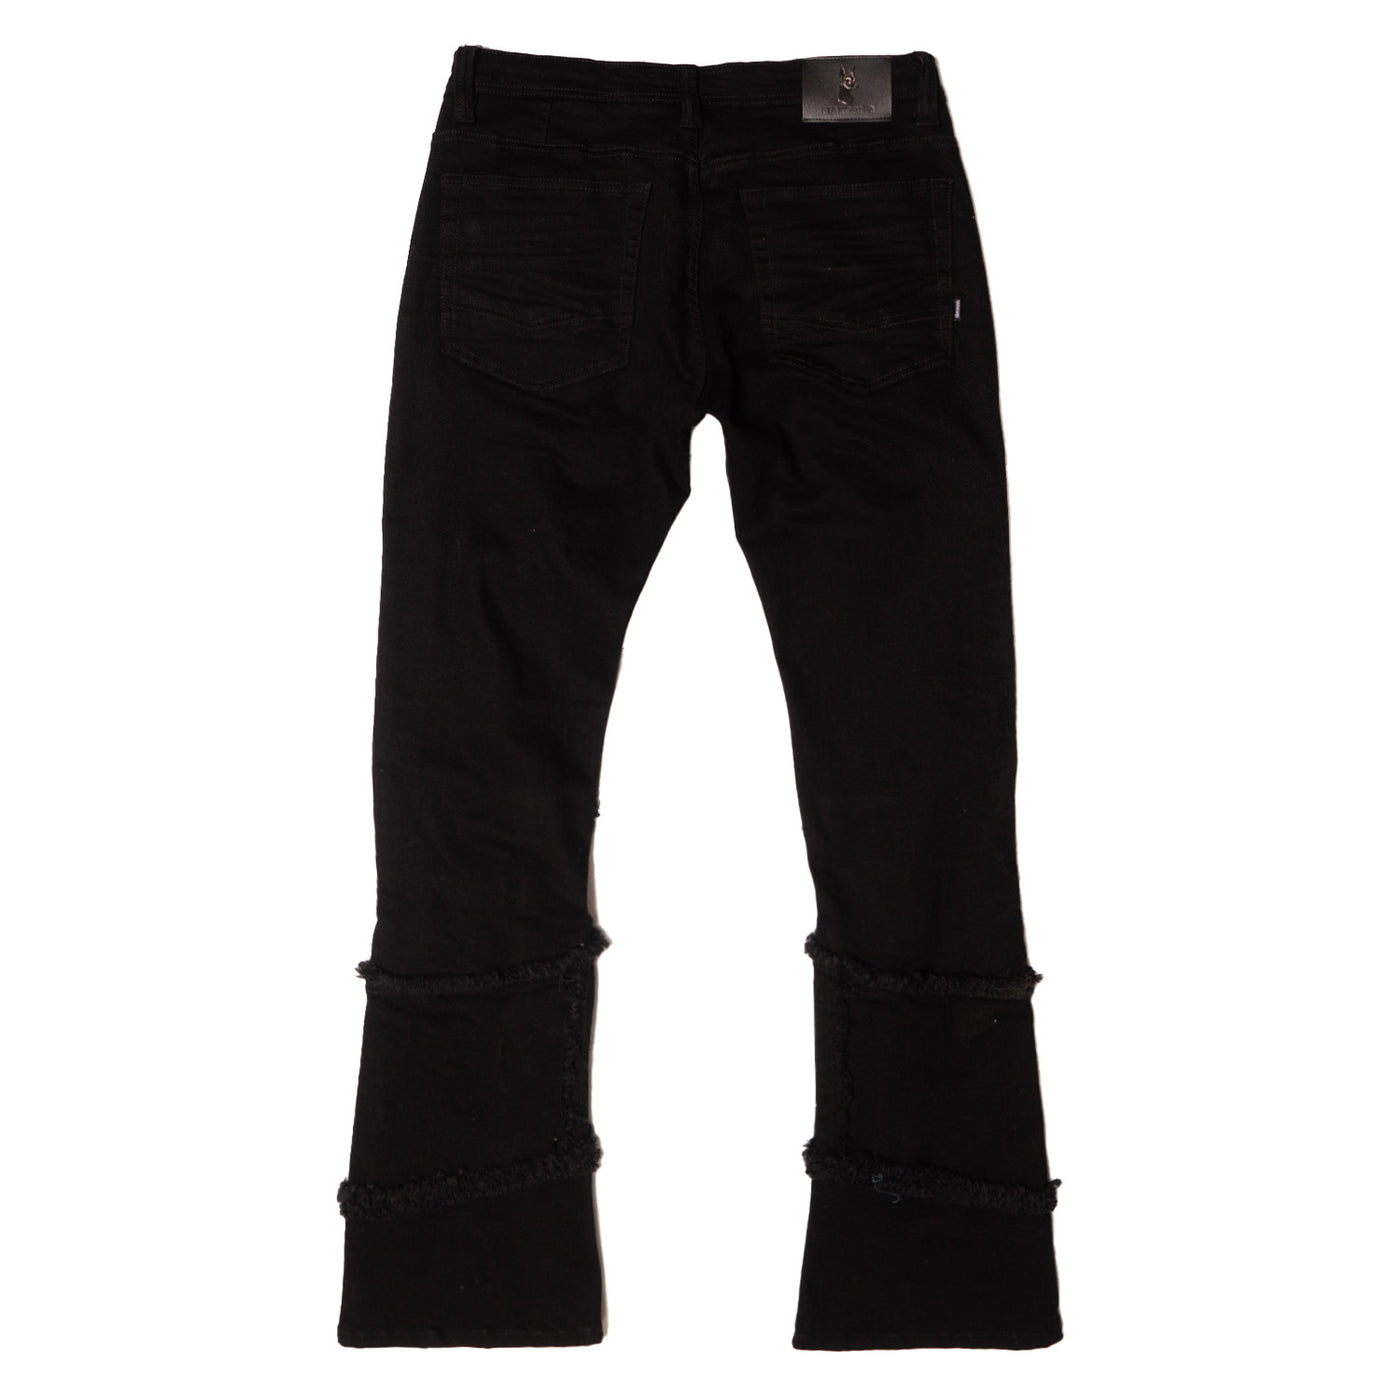 M1997 Gianos Stacked Jeans- Jet black